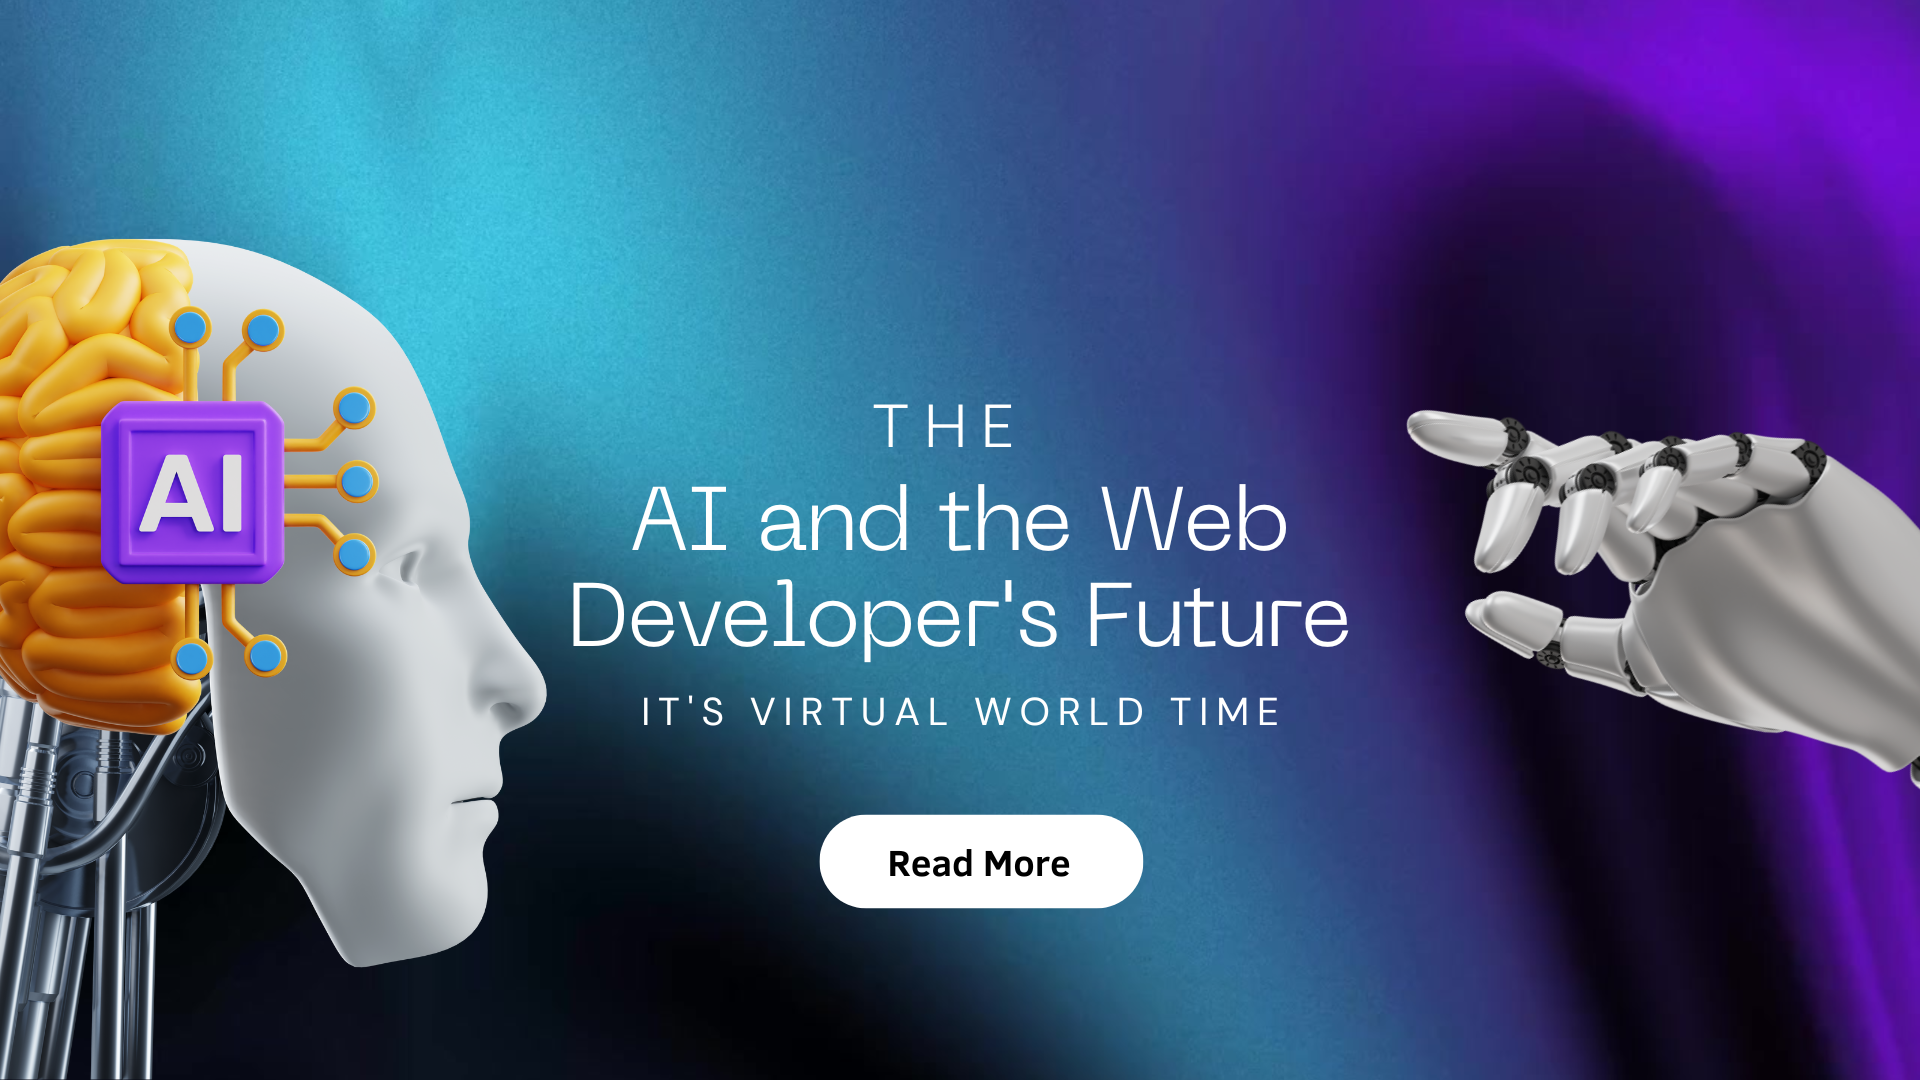 AI and the Web Developer's Future: Redefining Digital Landscapes